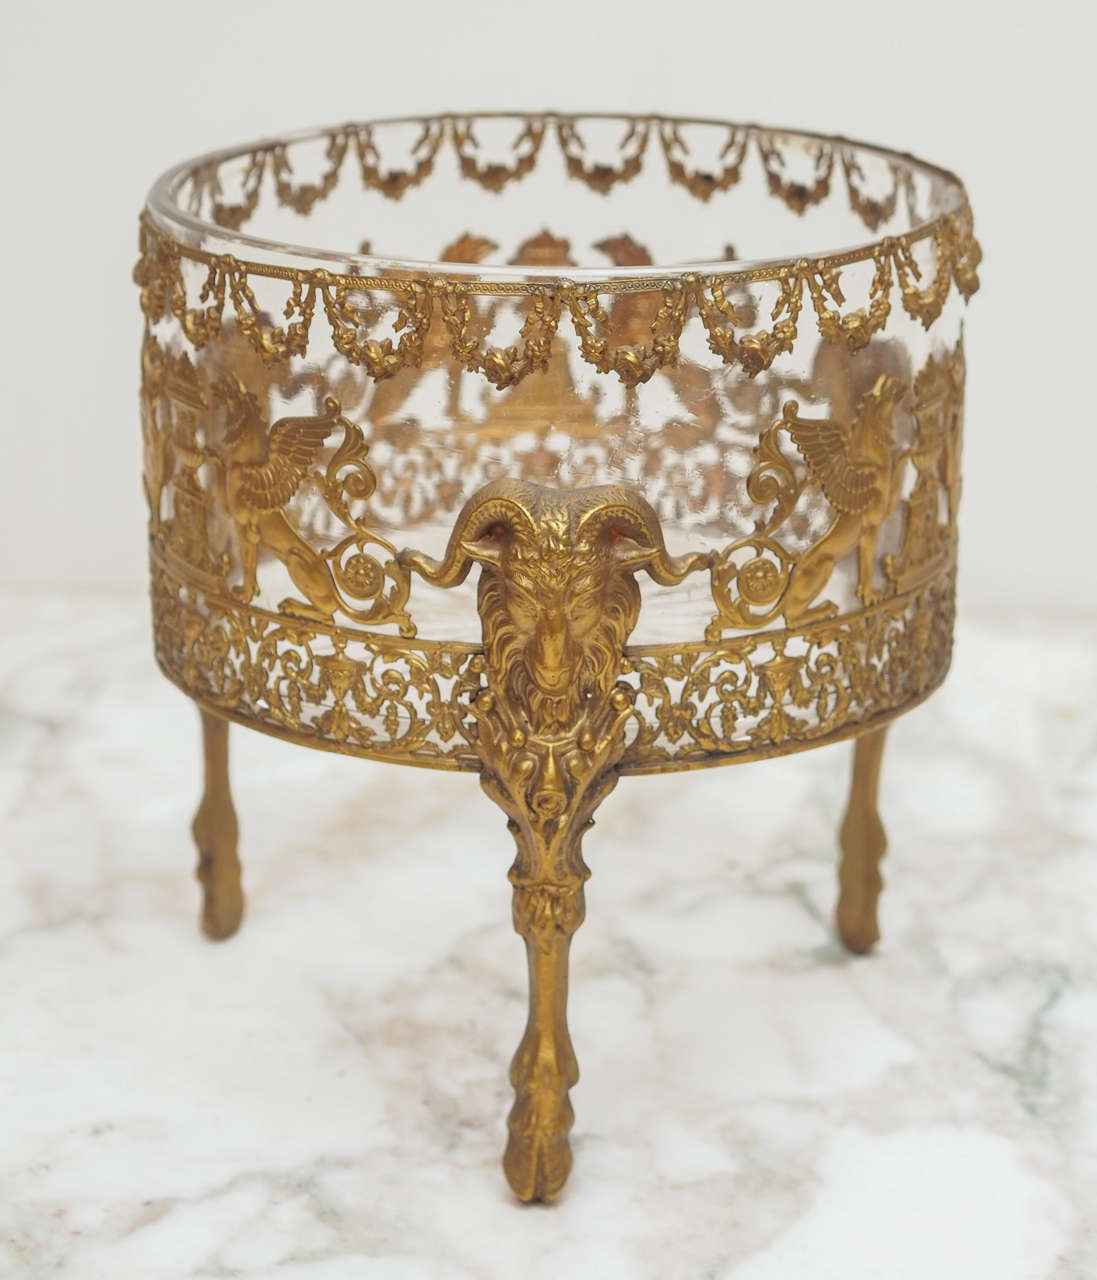 French Cut Crystal Bowl with Gilt Bronze Mounts with floral swags and classical winged griffins, rams heads and feet and foliate tracery. The quality of the decoration is superb